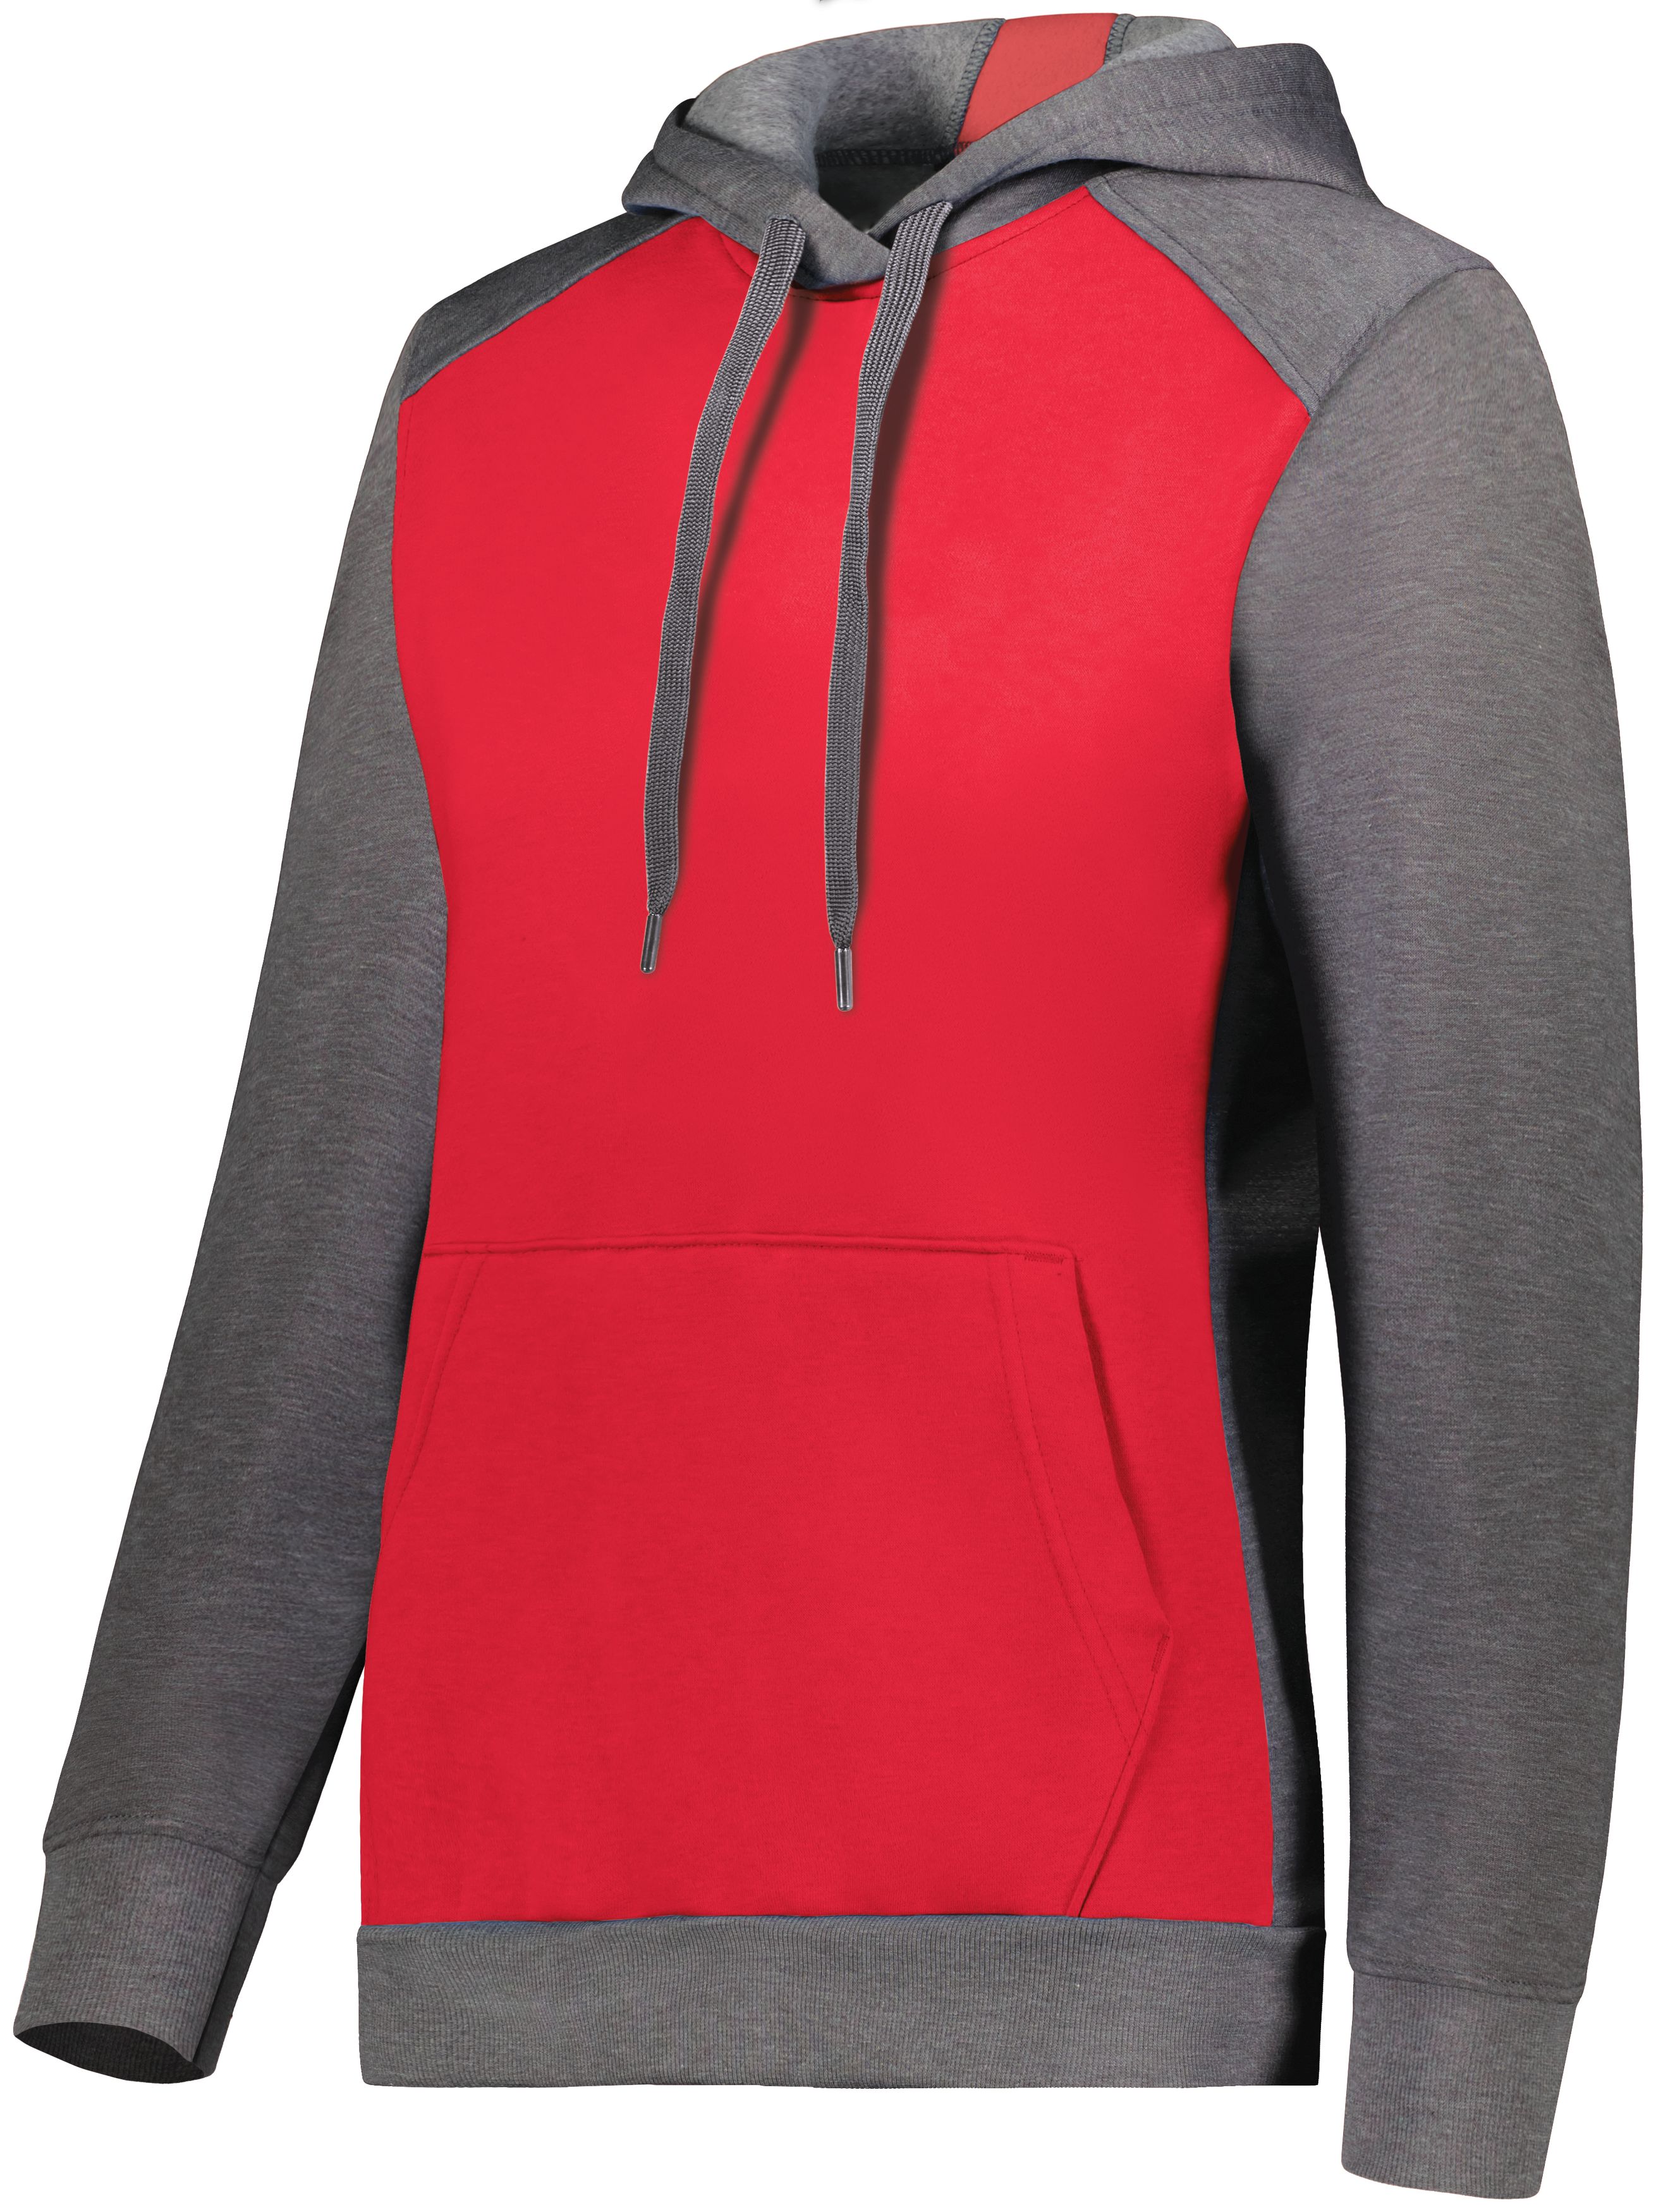 click to view Scarlet/Carbon Heather